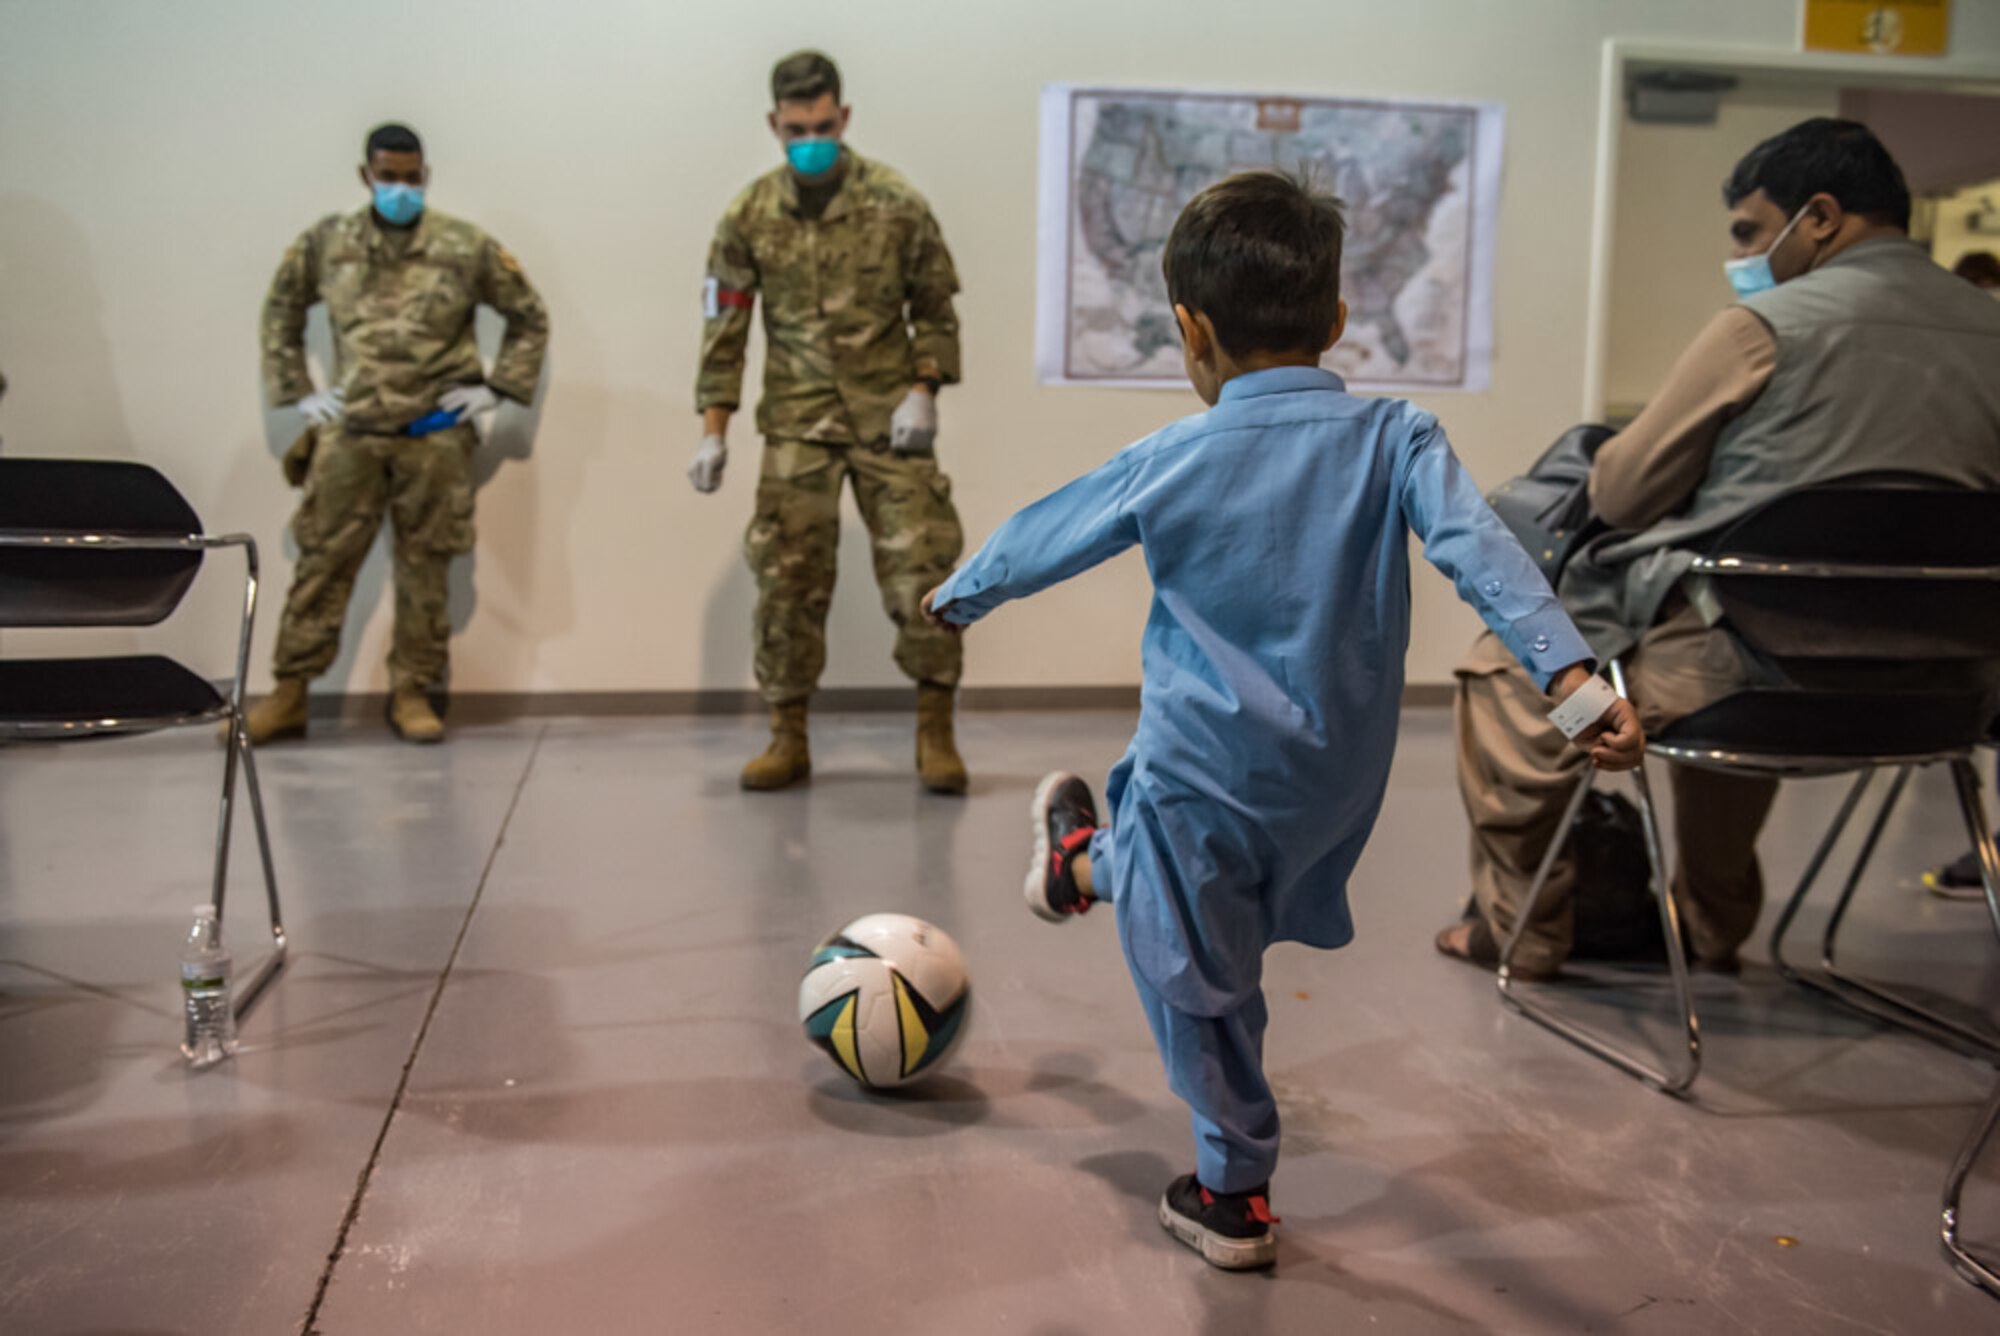 An Airman from Task Force-Holloman plays soccer with an Afghan evacuee at Holloman Air Force Base, New Mexico, Aug. 31, 2021. The Department of Defense, through U.S. Northern Command, and in support of the Department of State and Department of Homeland Security, is providing transportation, temporary housing, medical screening, and general support for up to 50,000 Afghan evacuees at suitable facilities, in permanent or temporary structures, as quickly as possible. This initiative provides Afghan evacuees essential support at secure locations outside Afghanistan. (U.S. Air Force photo by Staff Sgt. Kenneth Boyton)